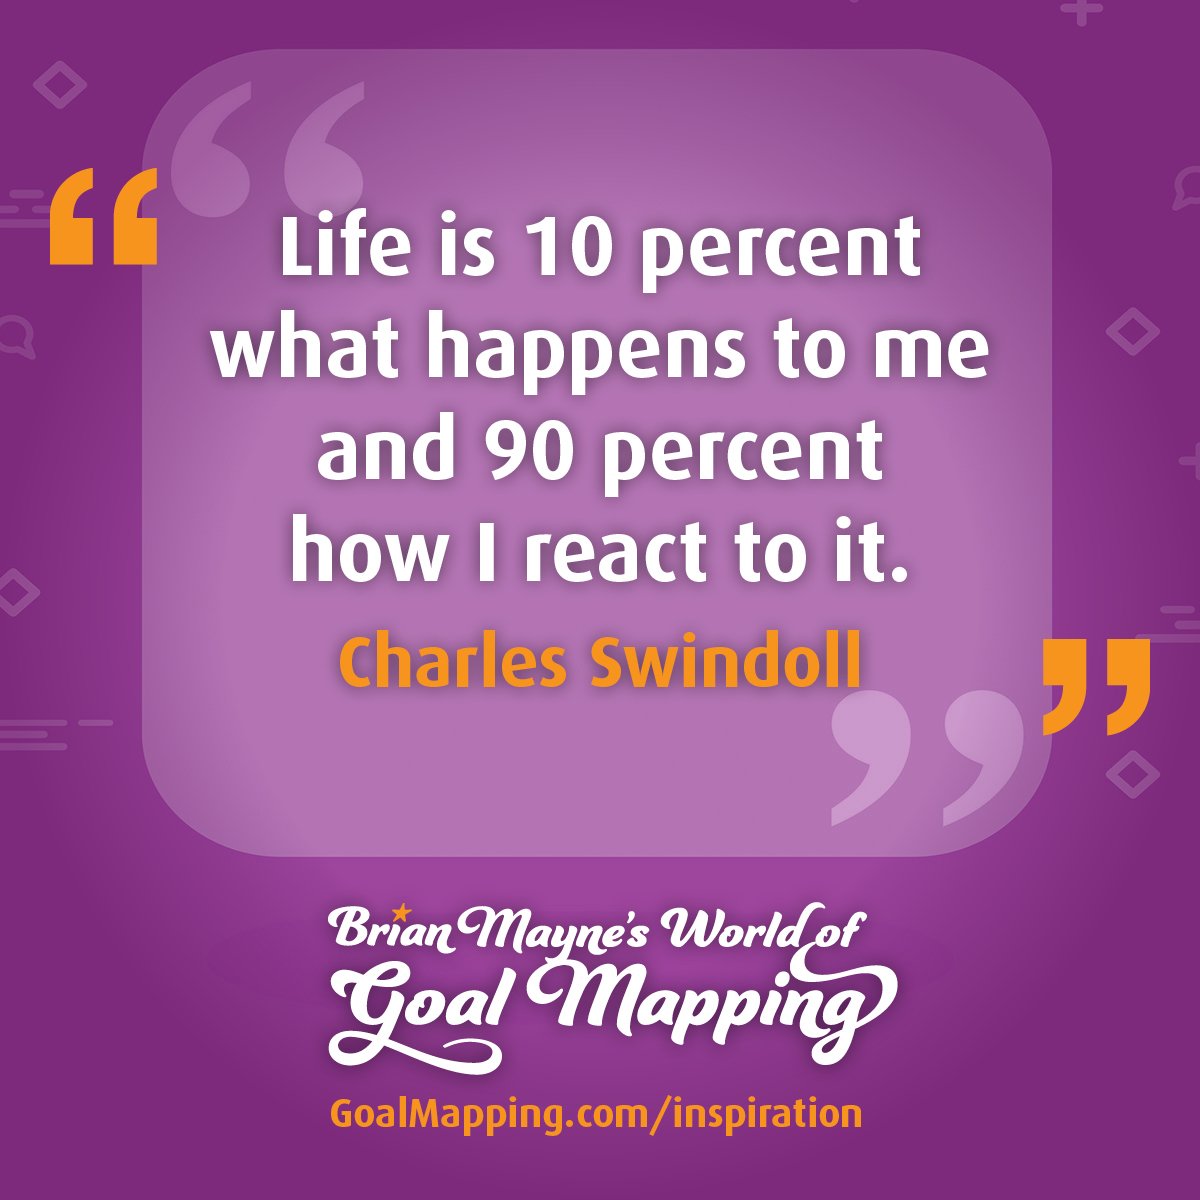 "Life is 10 percent what happens to me and 90 percent how I react to it." Charles Swindoll